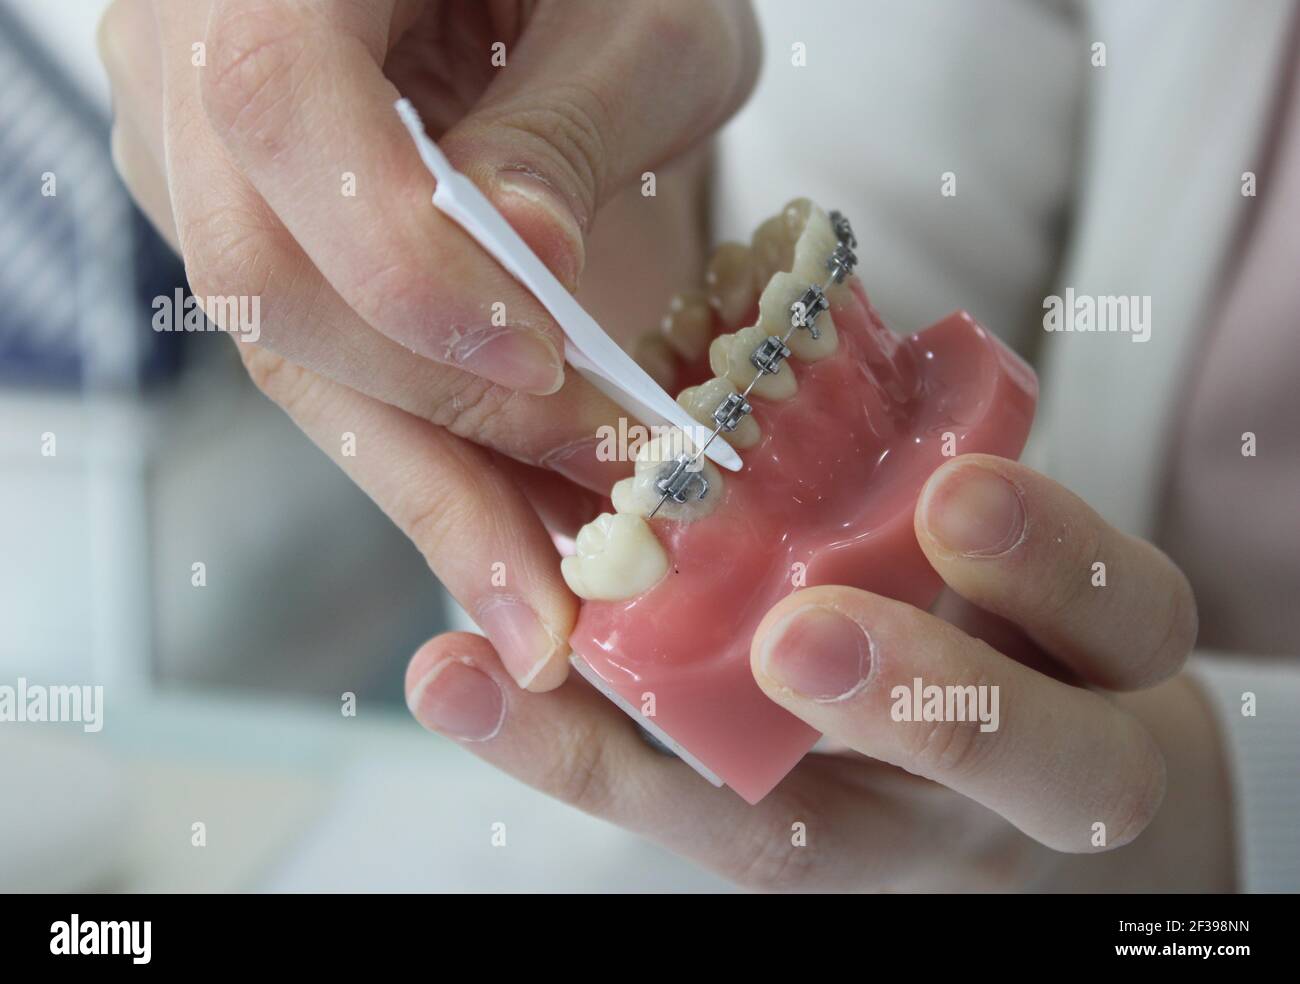 Dental professional showing how to floss with braces Stock Photo